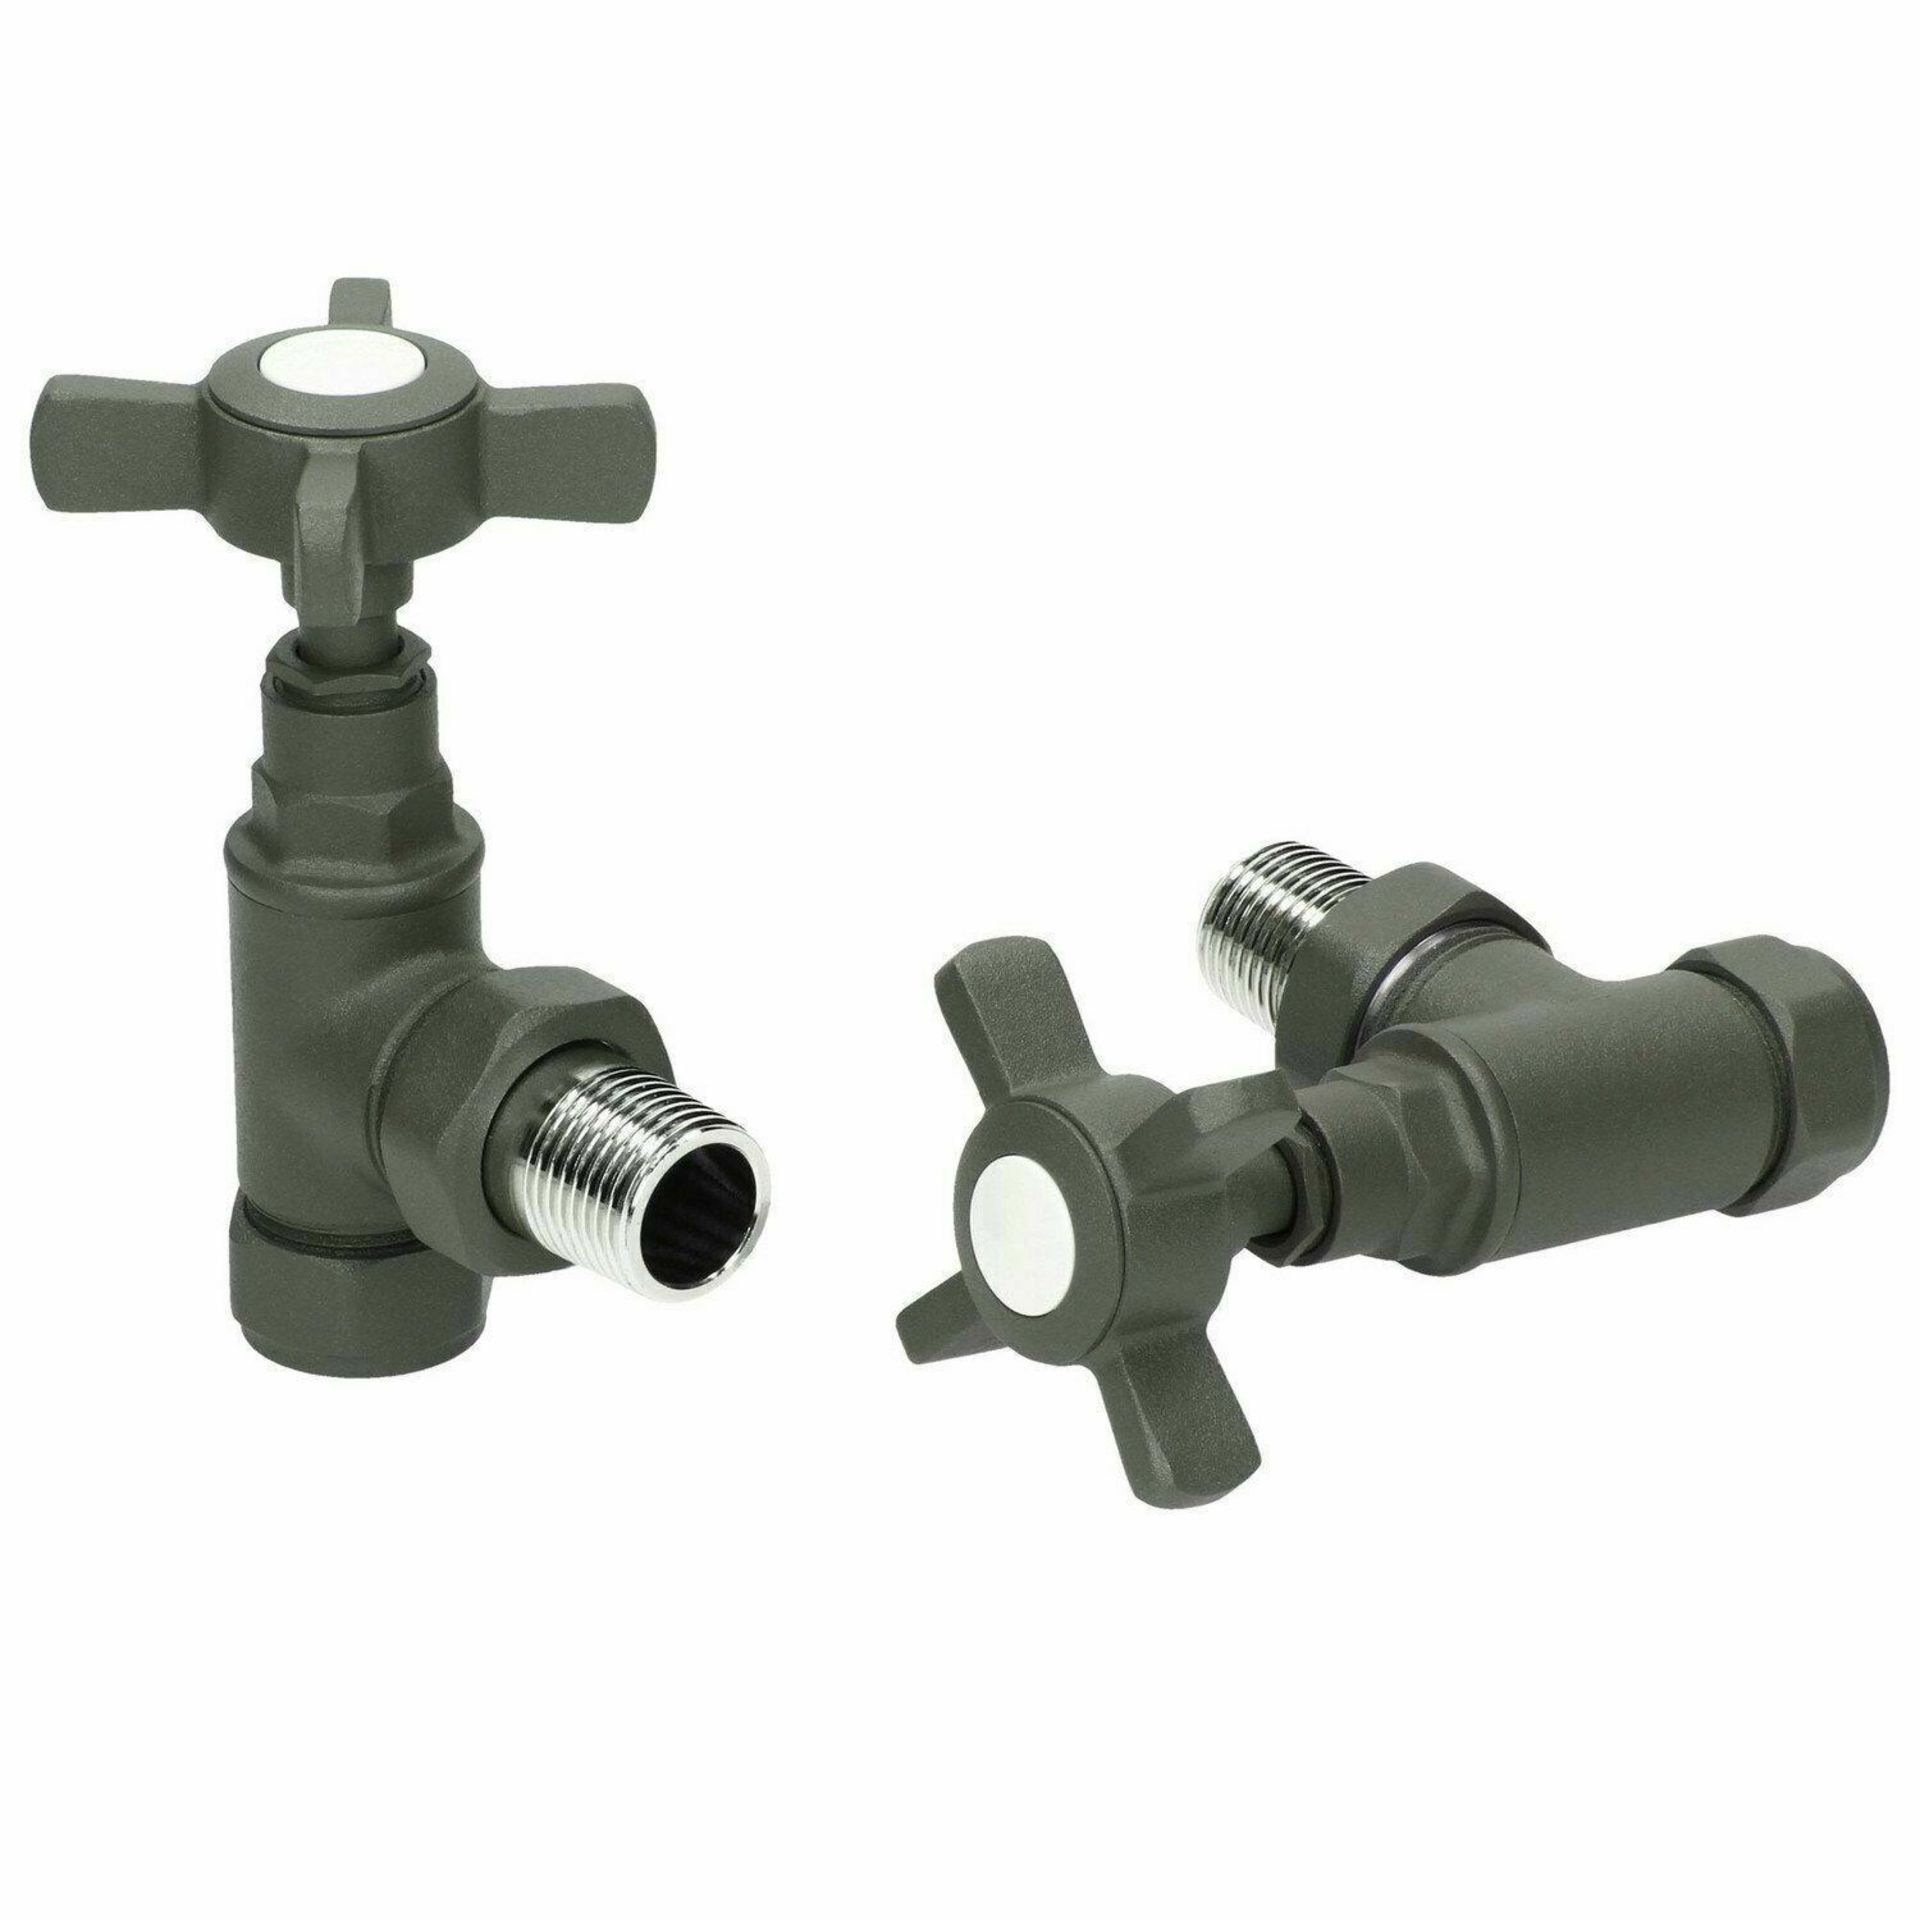 NEW (MR43) 15mm Traditional Angled Heated Towel Rail Radiator Valves Standard Pair Anthracite.R... - Image 2 of 2